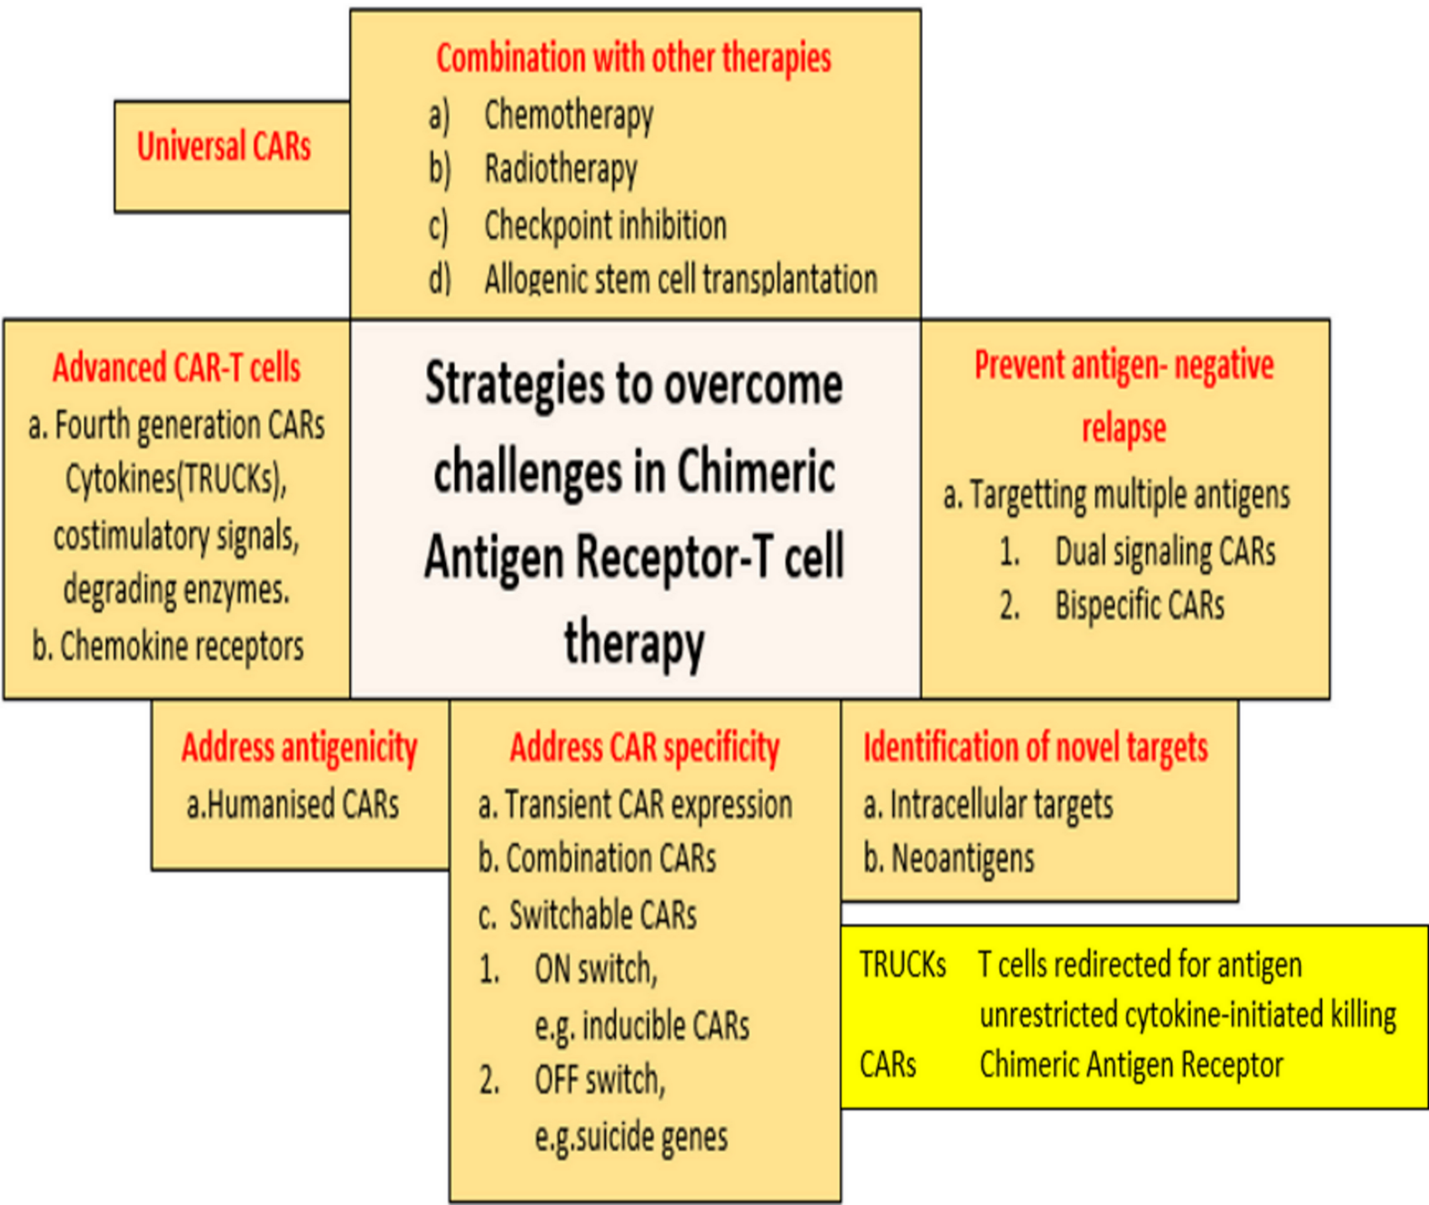 Summary-of-some-of-the-strategies-to-overcome-challenges-in-CAR-T-cell-therapy.